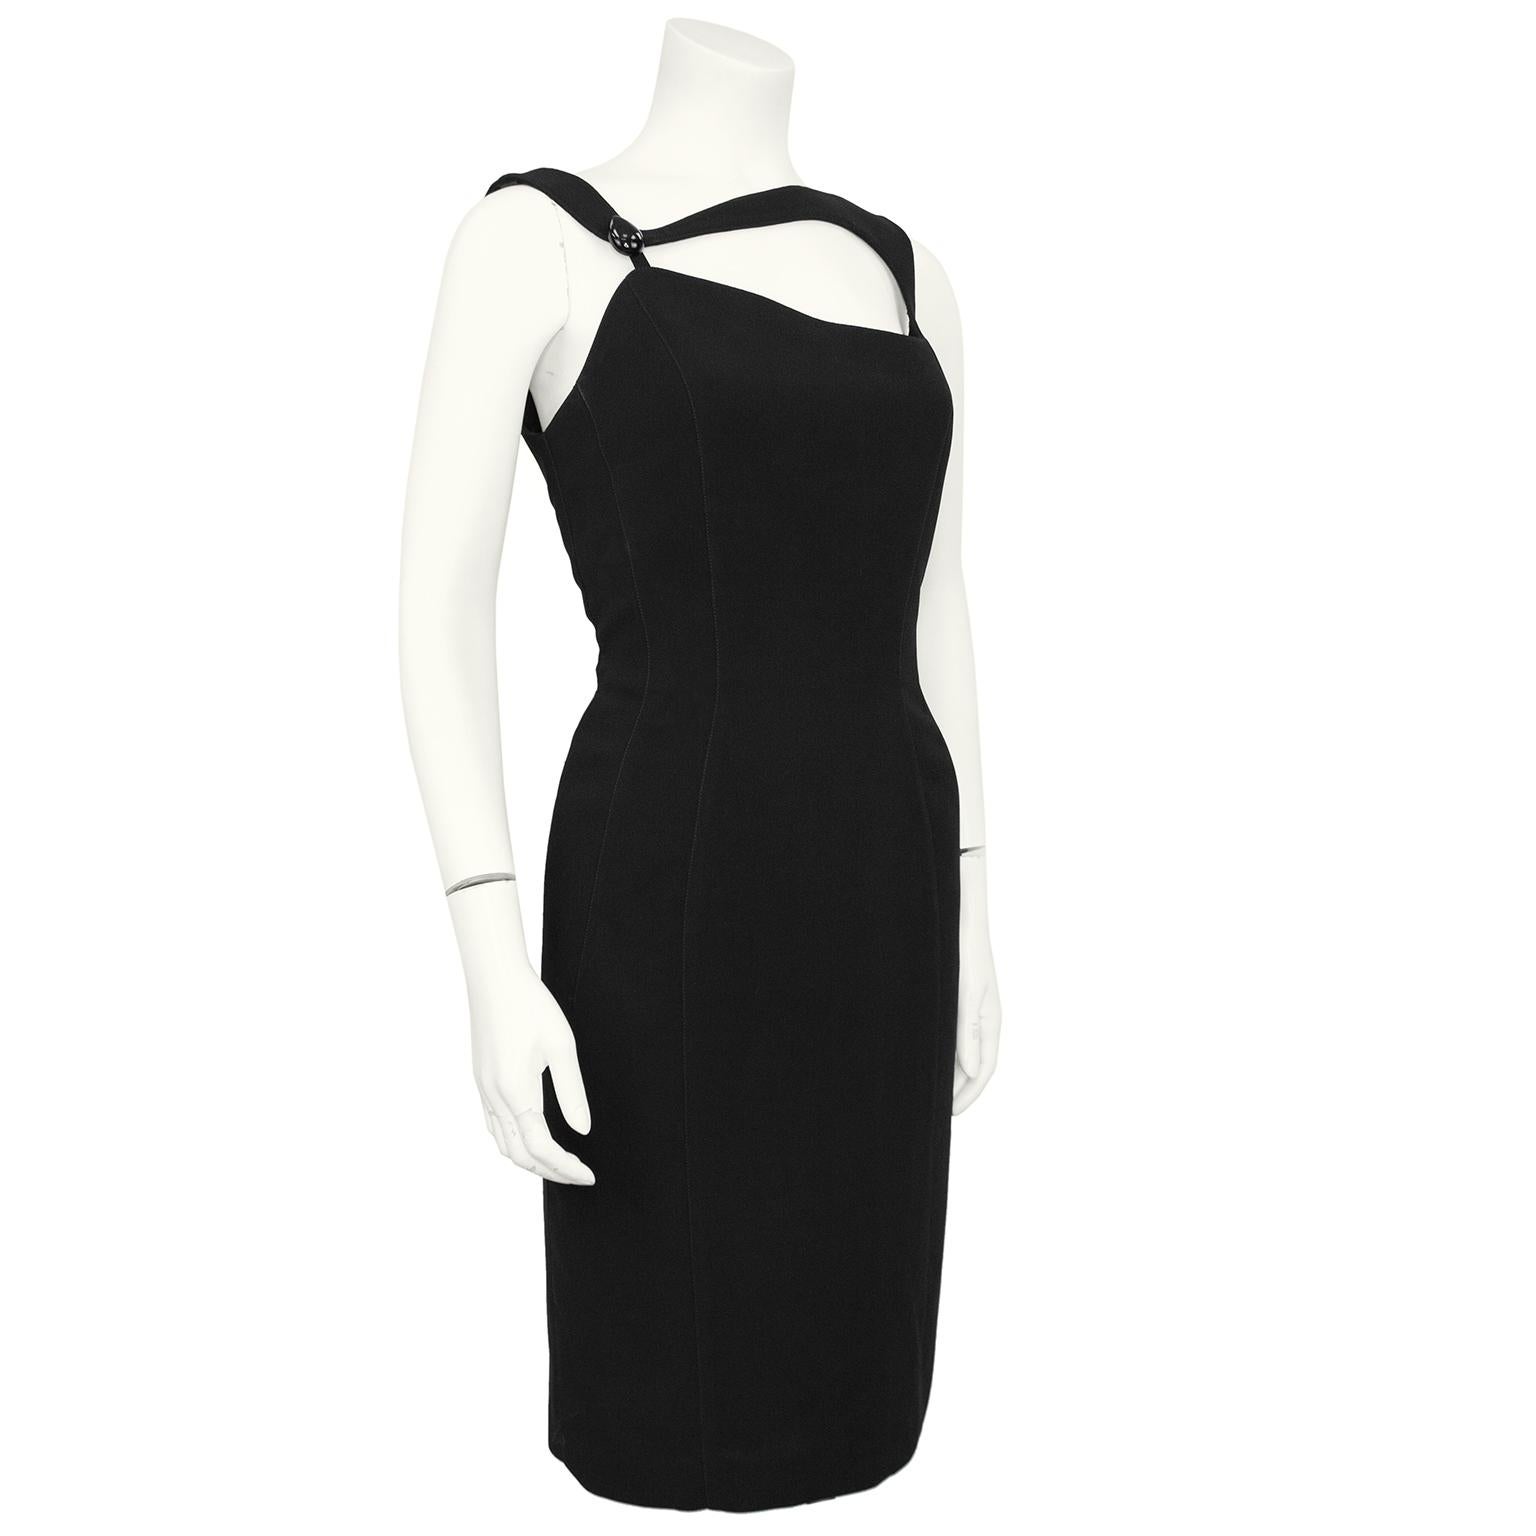 A Mugler take on a little black dress. This dress features a classic bon con shape with interesting and asymmetrical straps and neckline. Domed black egg shaped button on left strap. You can see Mugler's 1960's space age references in this piece.